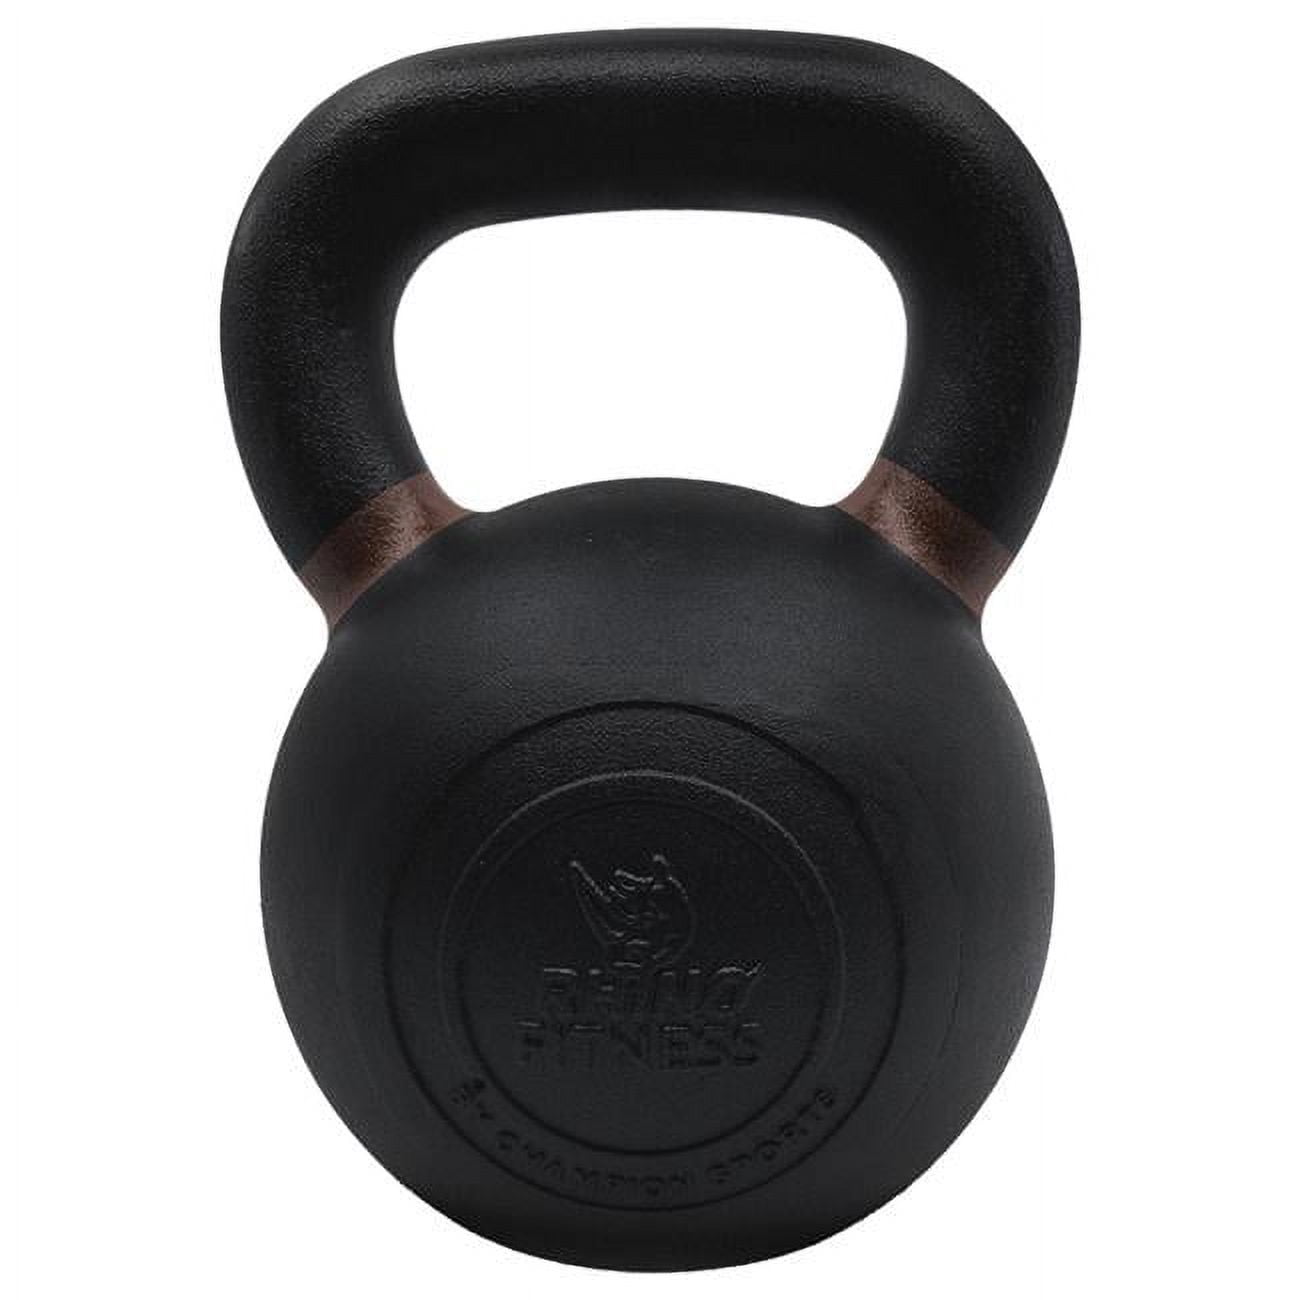 Picture of Champion Sports PCK60 8 x 7 x 11 in. 60 lbs Iron Kettlebell with Brown Handles